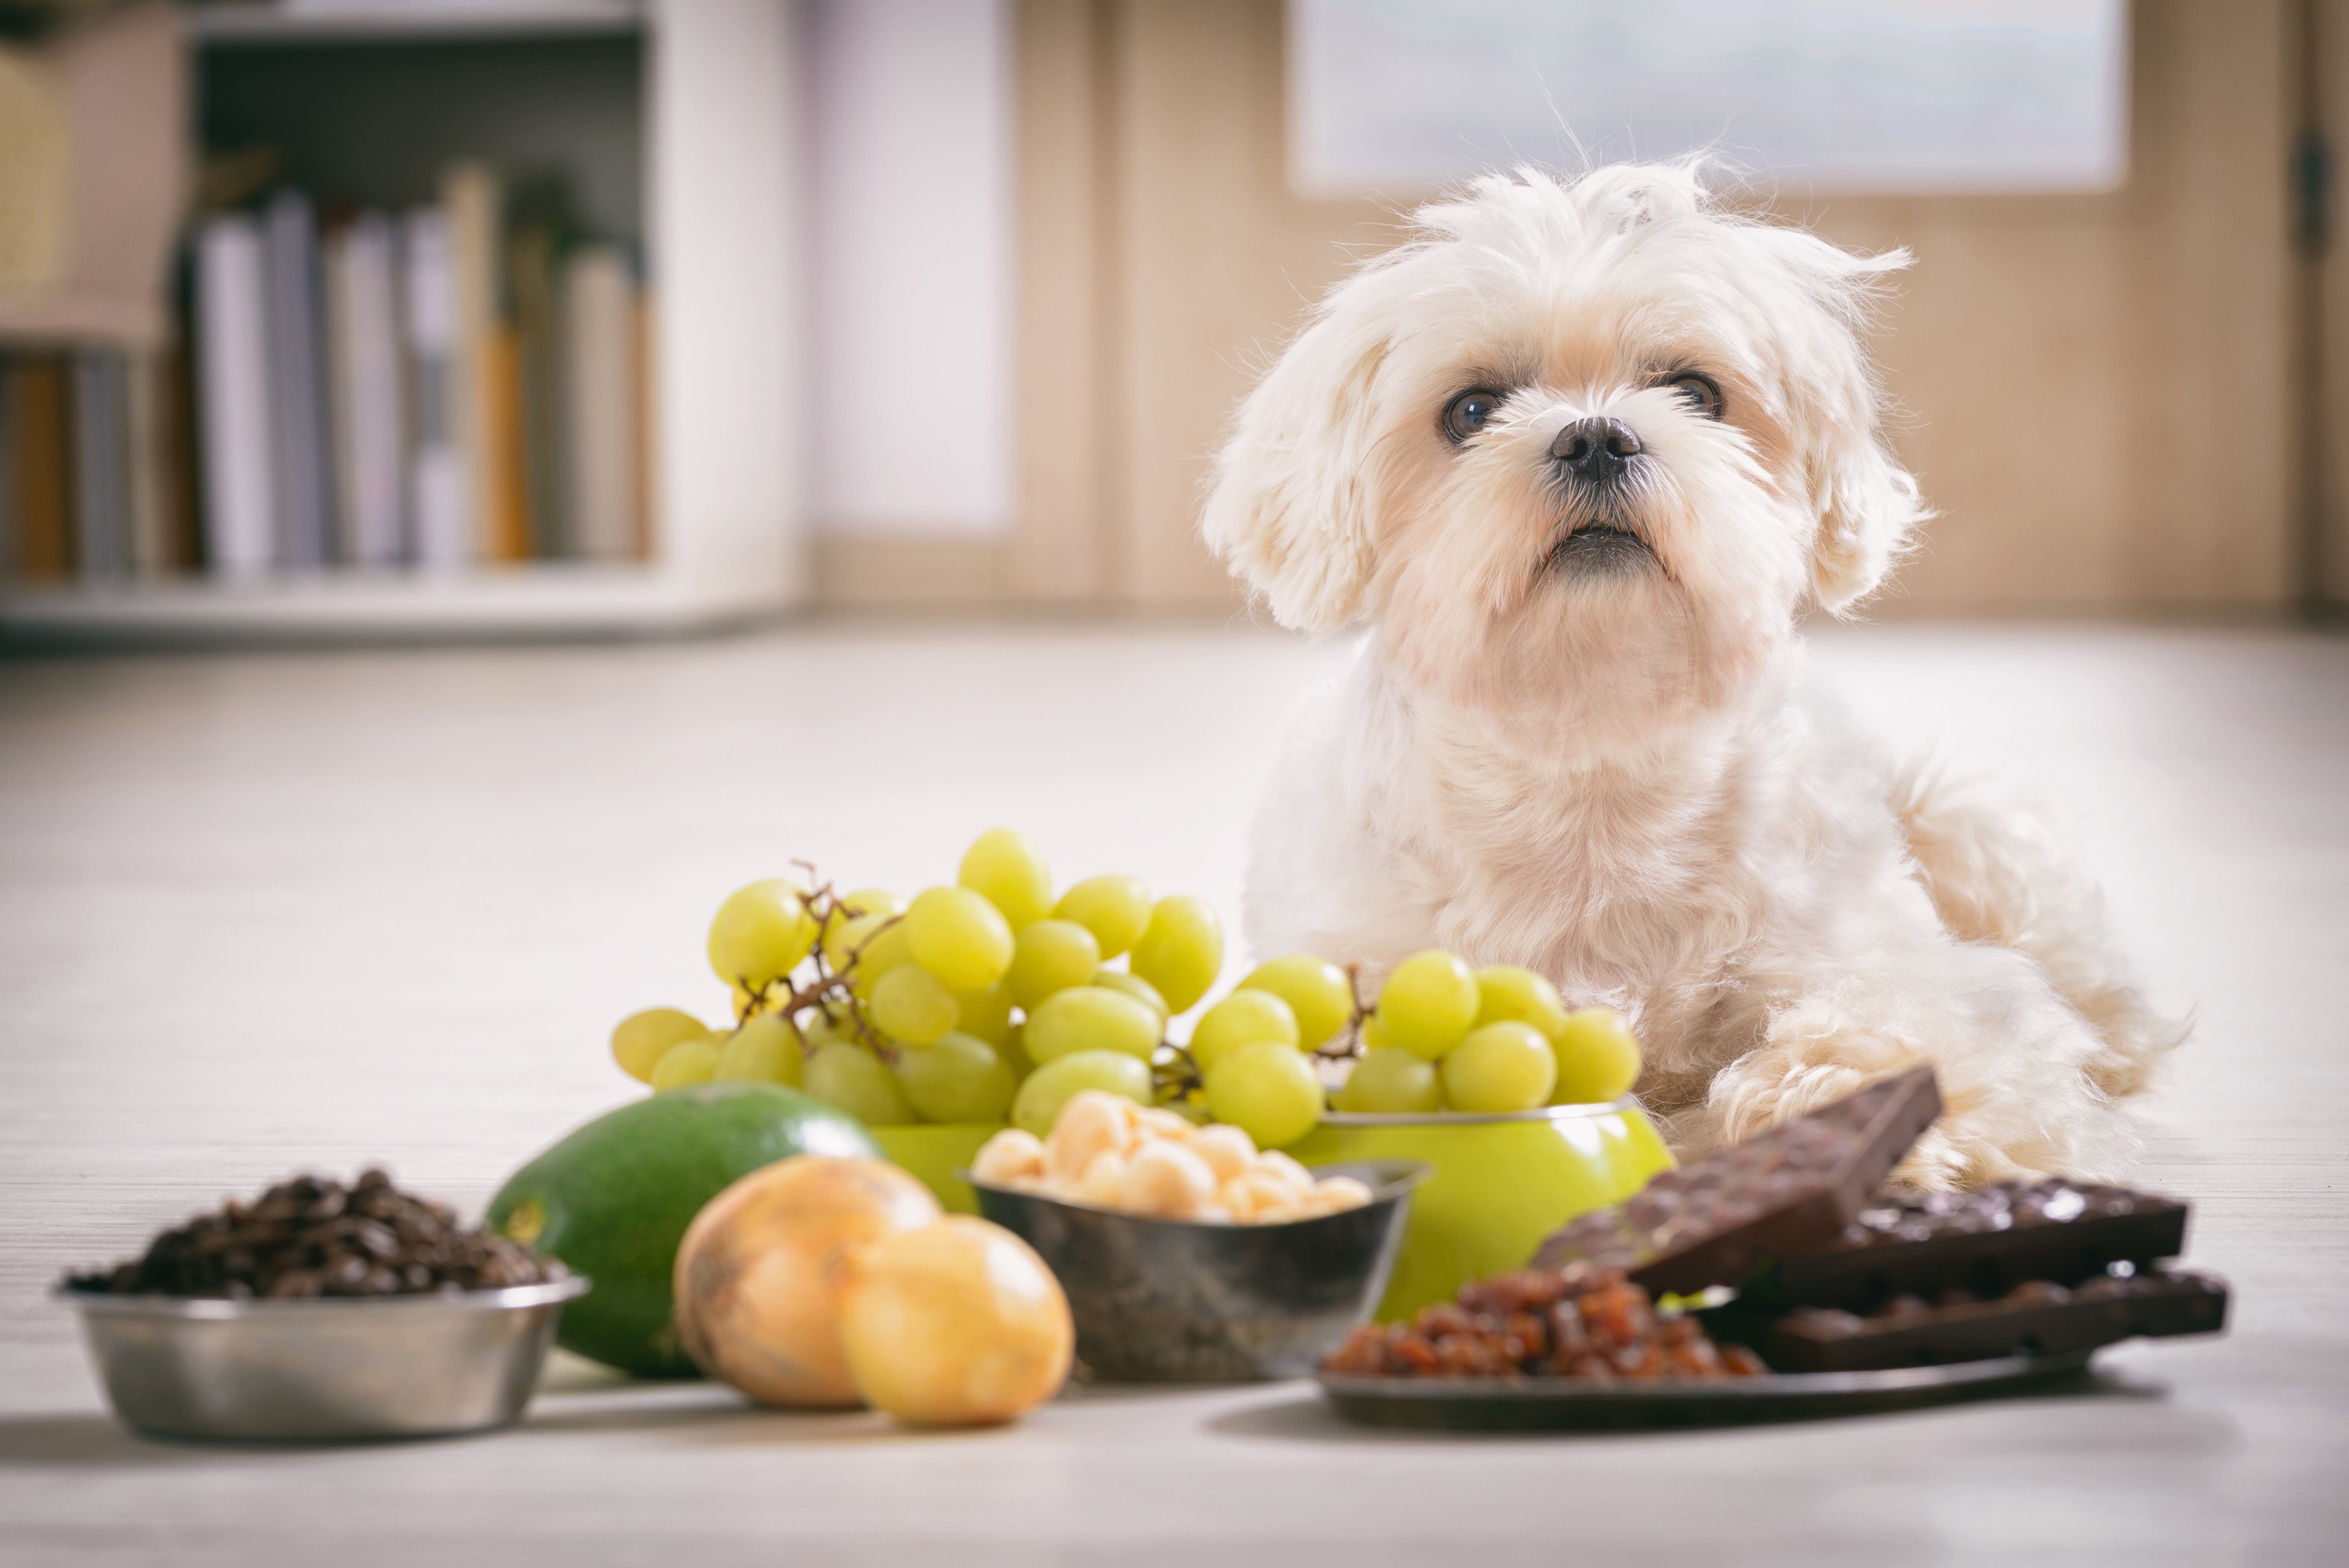 Common Household Items Toxic to Dogs